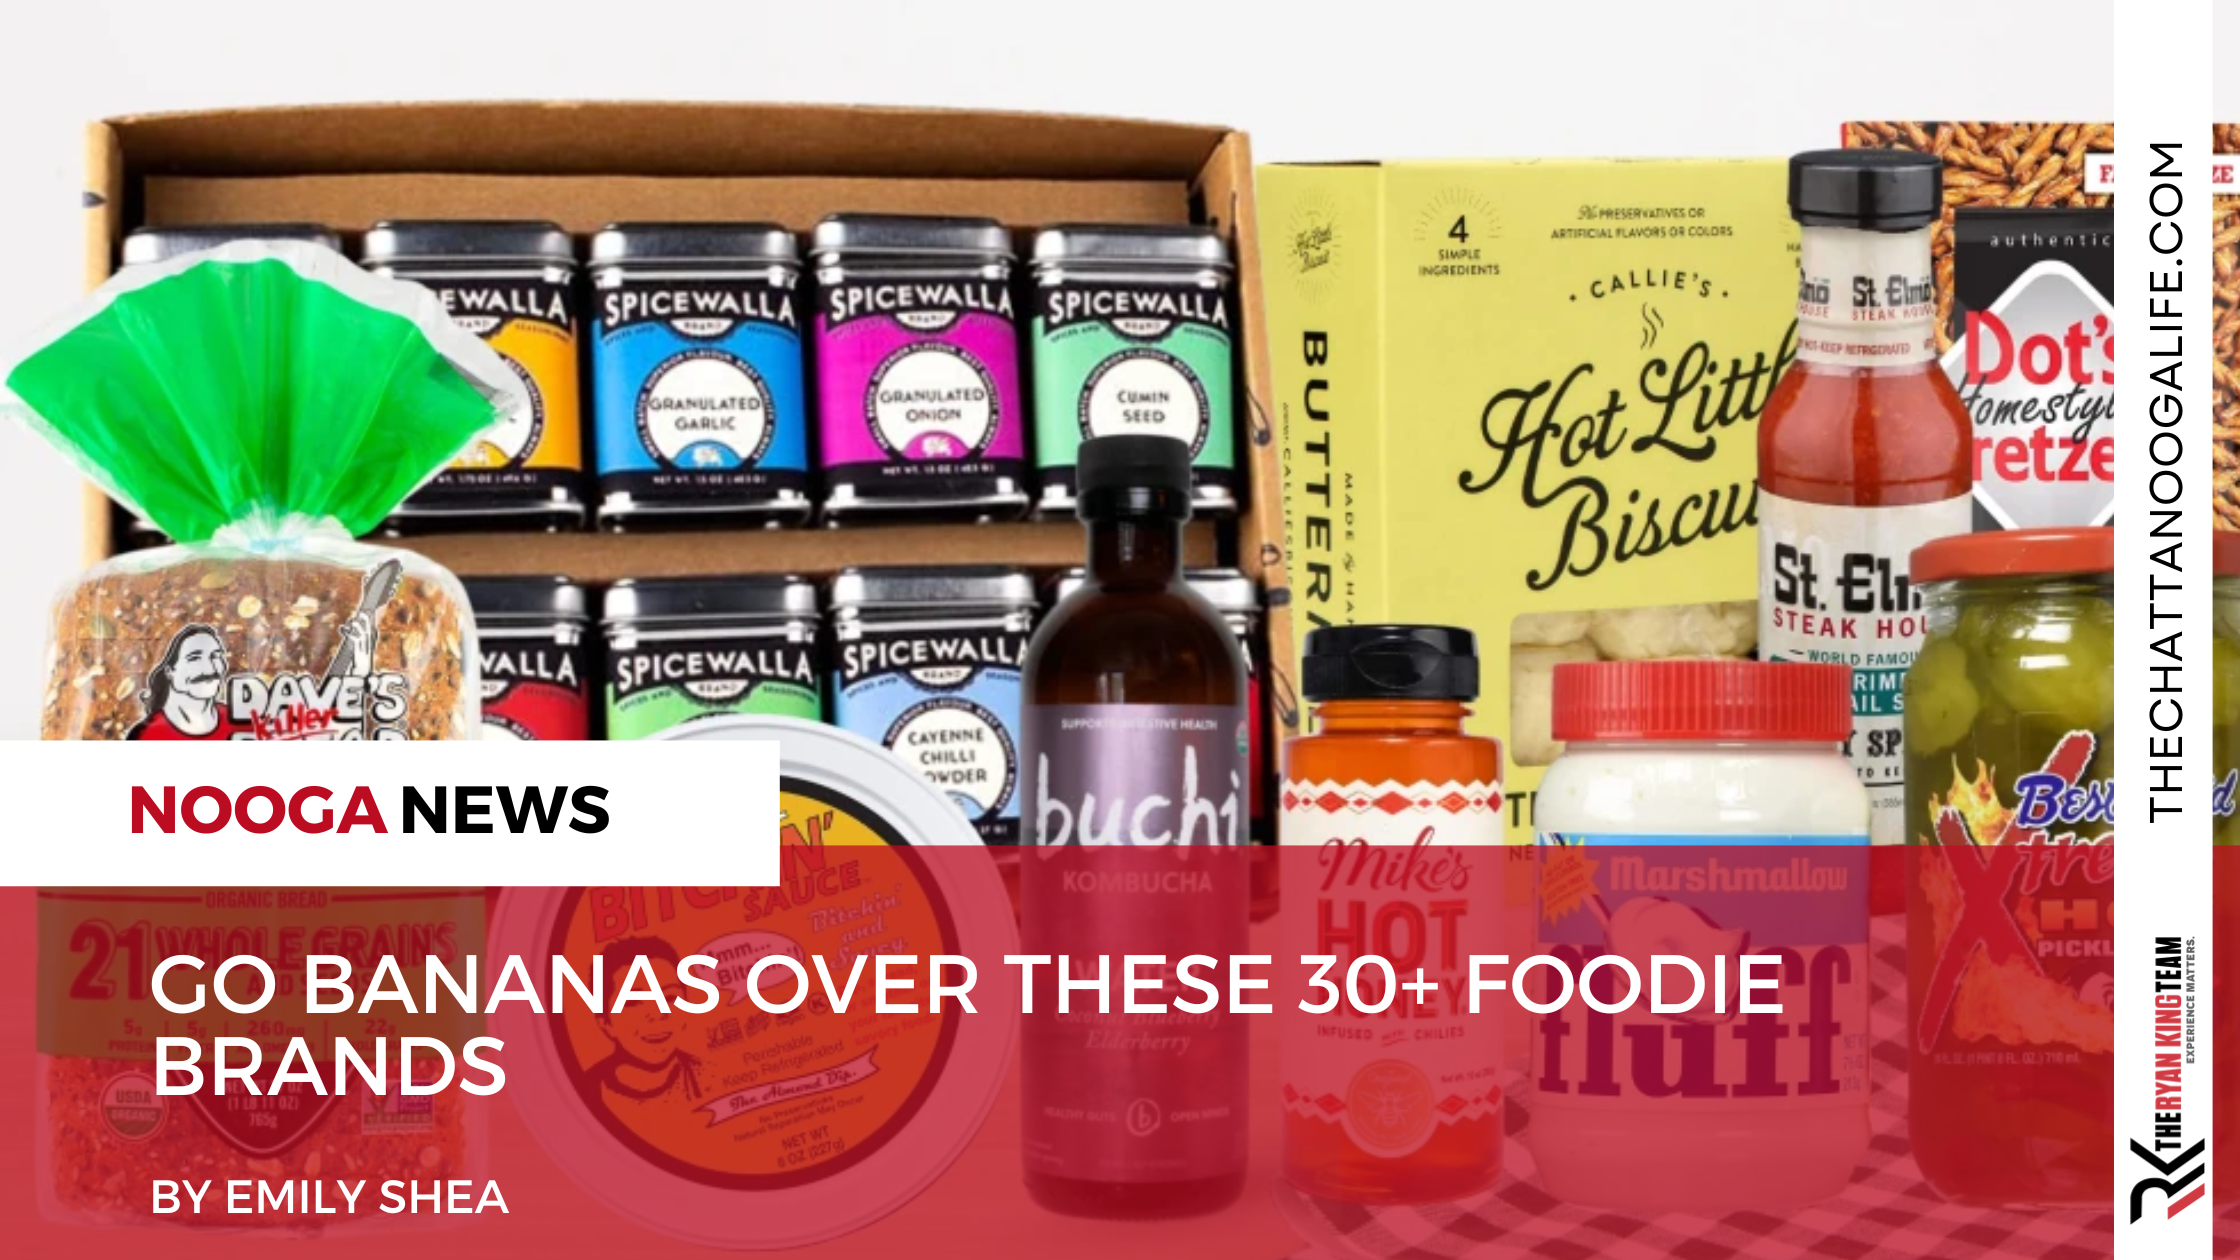 Go bananas over these 30+ foodie brands